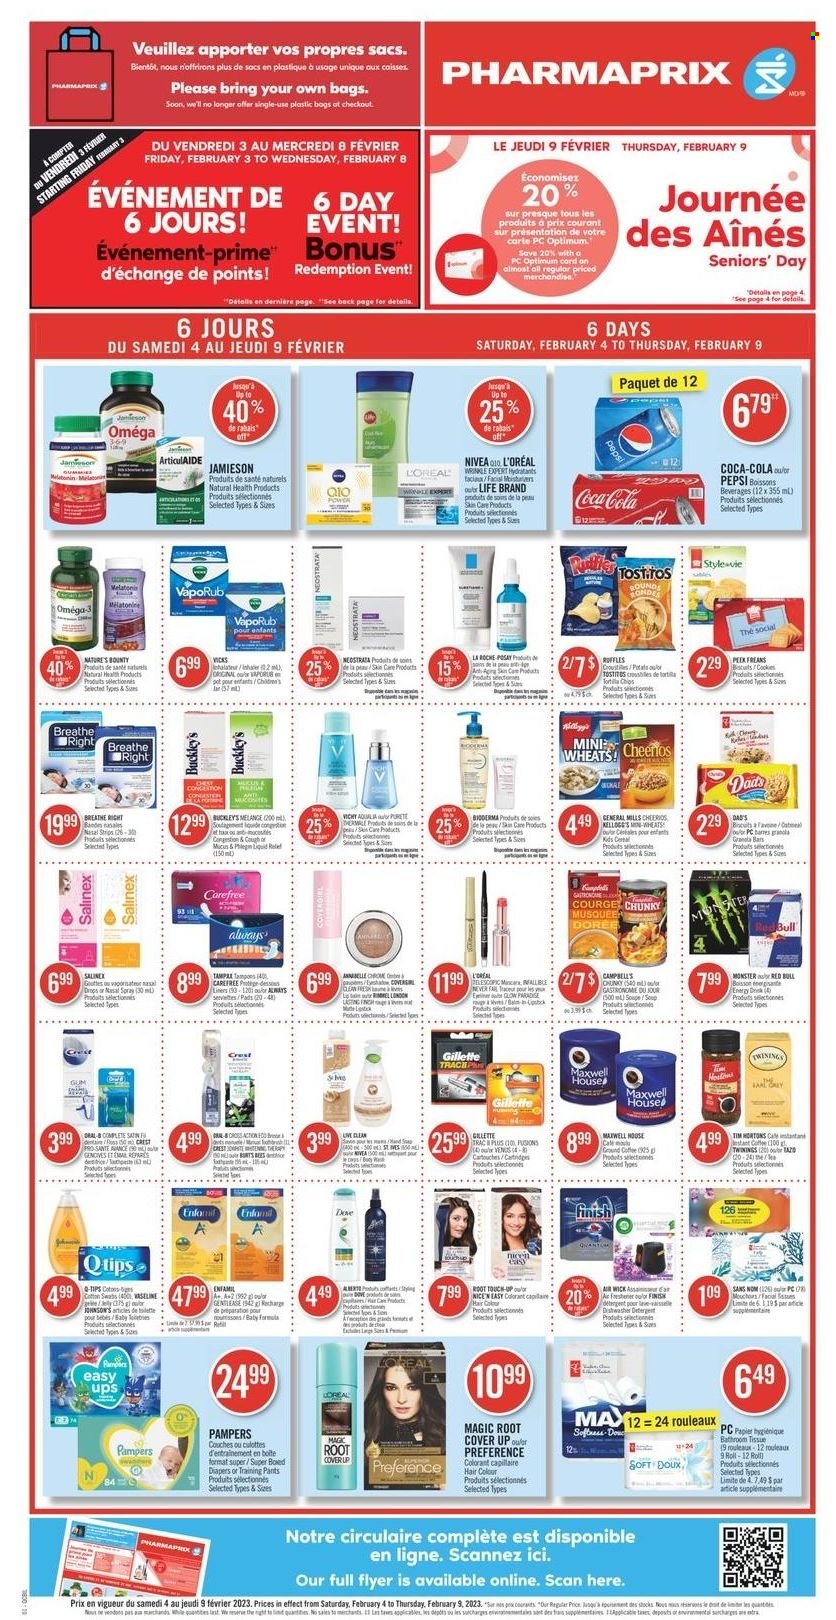 thumbnail - Pharmaprix Flyer - February 04, 2023 - February 09, 2023 - Sales products - cherries, Campbell's, soup, cookies, Dove, Kellogg's, biscuit, chips, Ruffles, Tostitos, Cheerios, Coca-Cola, Pepsi, Monster, Red Bull, Maxwell House, Twinings, coffee, Pampers, pants, nappies, Johnson's, baby pants, Nivea, bath tissue, Vichy, Crest, Carefree, Gillette, L’Oréal, La Roche-Posay, hair color, Vicks, pot, pan, Air Wick, Optimum, tote, Melatonin, Nature's Bounty, Omega-3, VapoRub, nasal spray, detergent, Oral-B. Page 1.